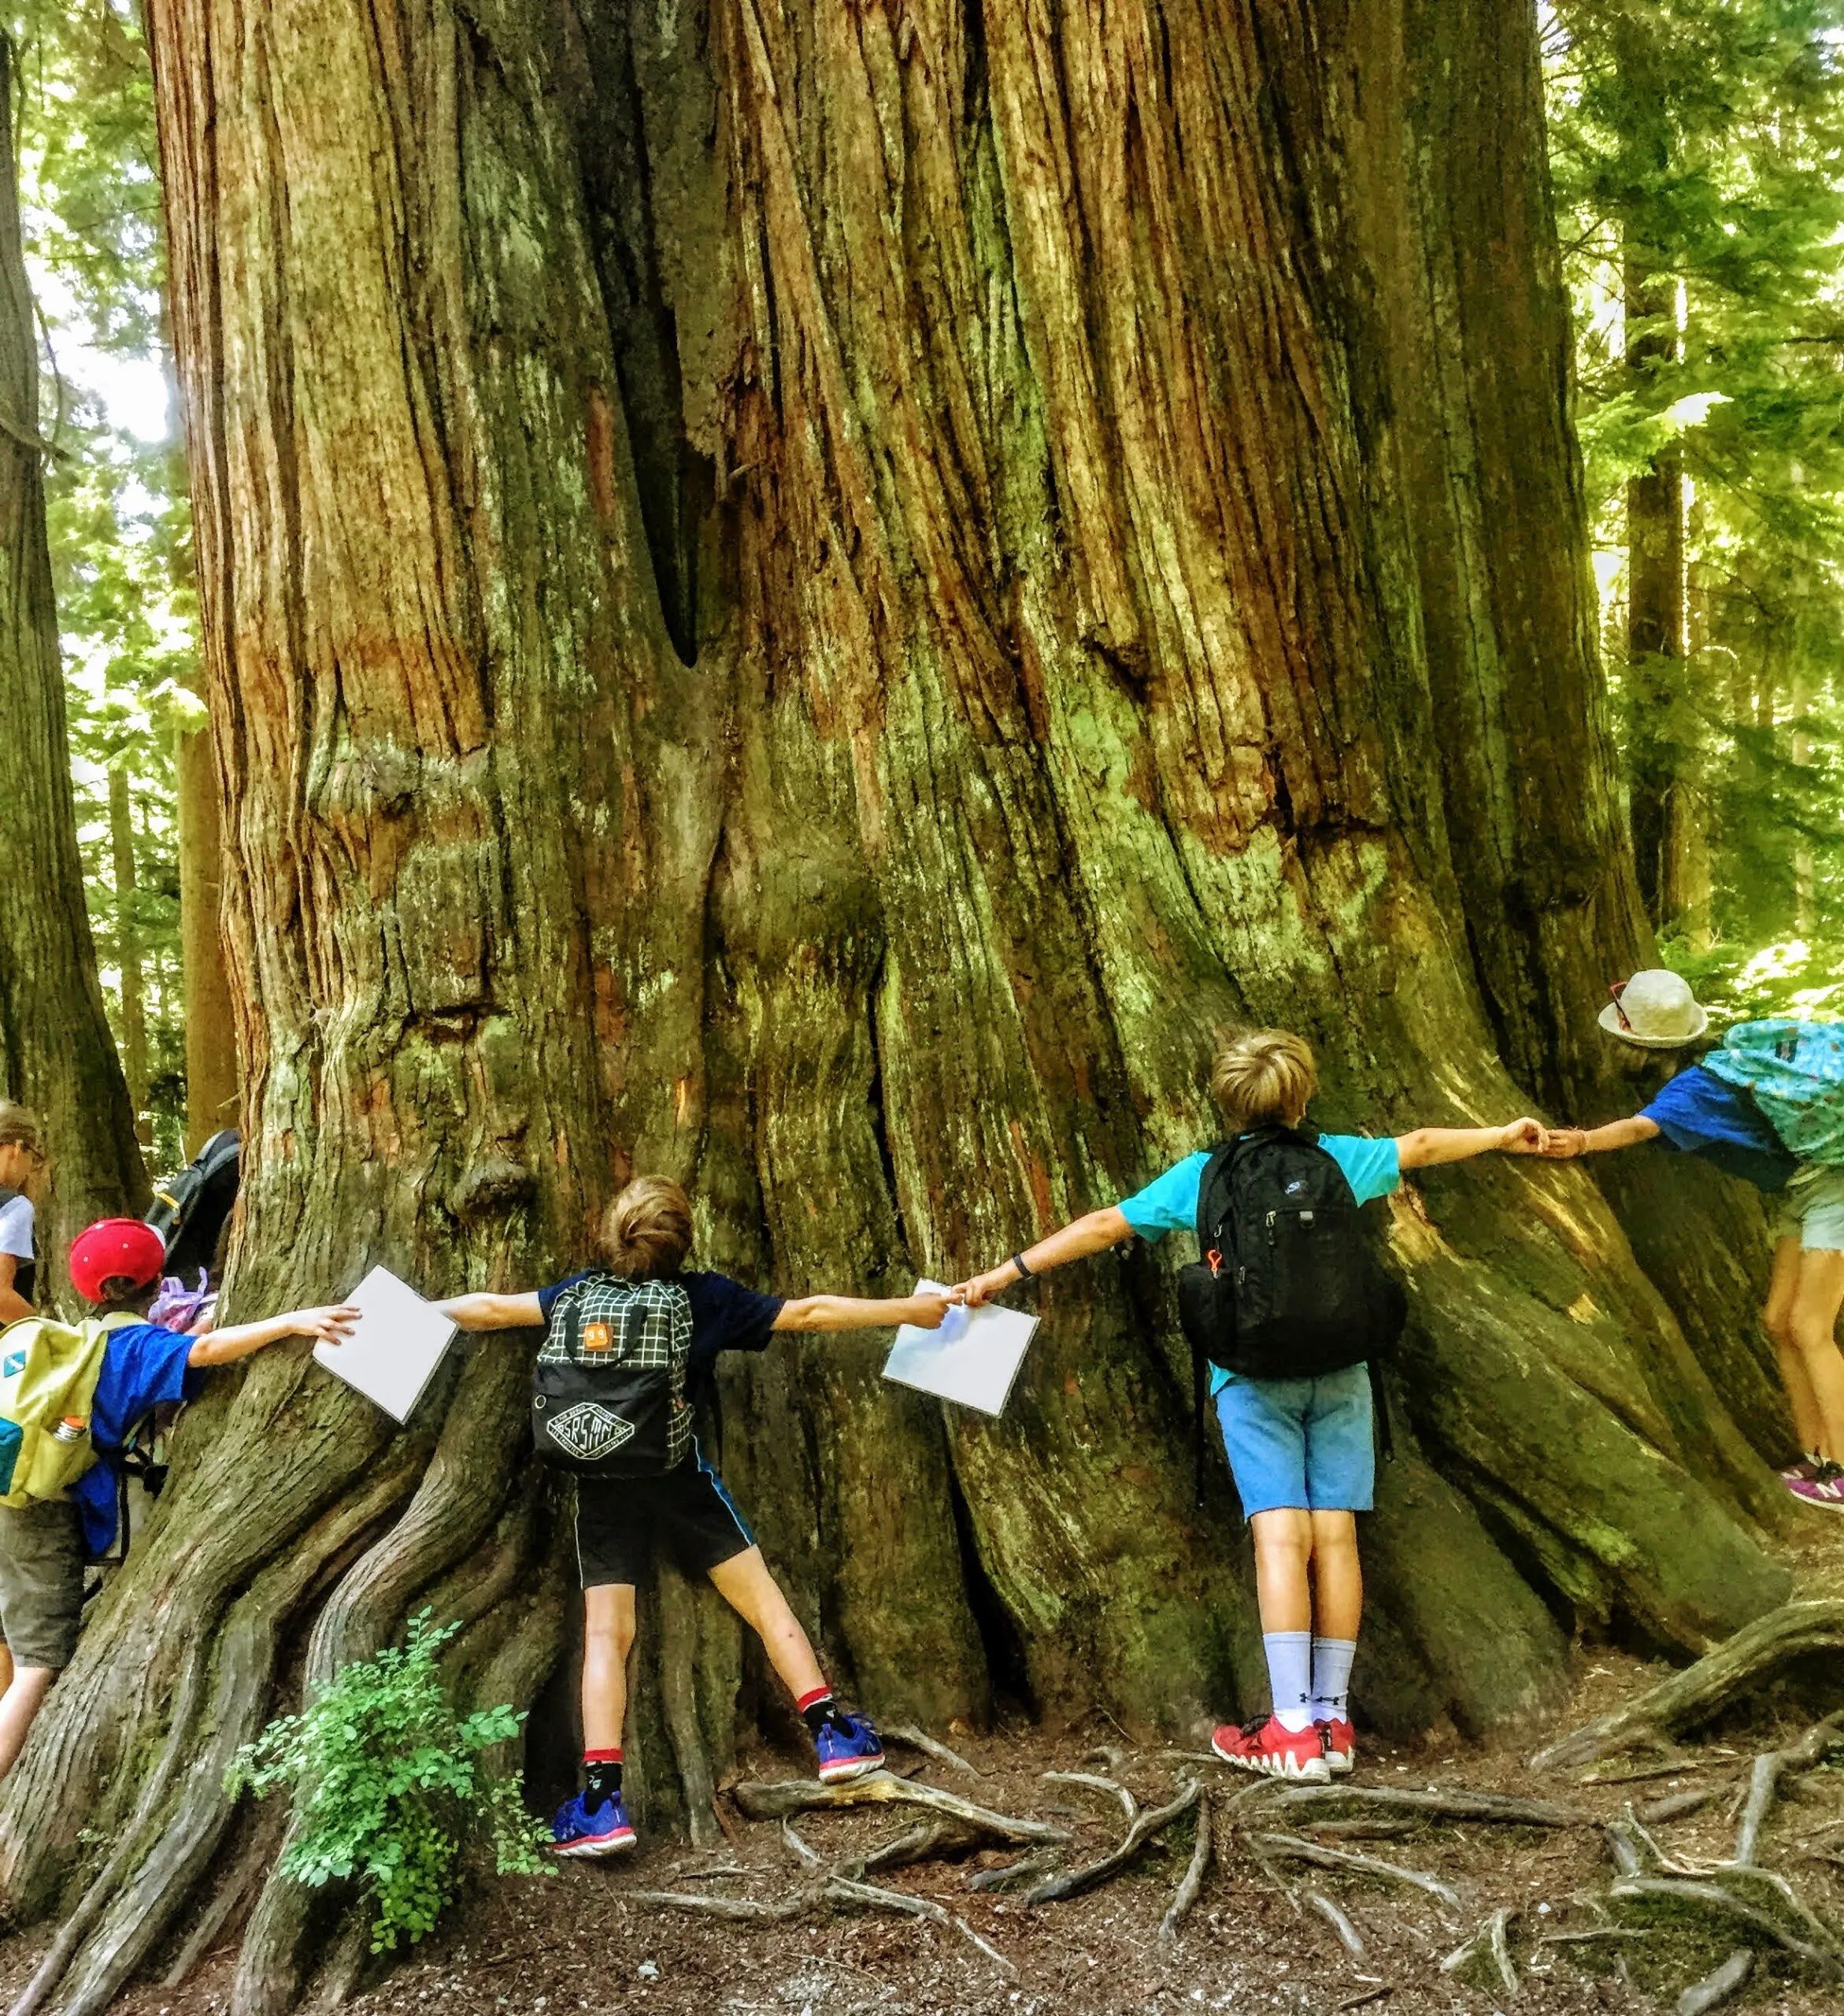 Kids on a SPES school program in Stanley Park wrap their arms around an old growth cedar tree, one of the few remaining giants left in the Lower Mainland. (Credit: Justine Kaseman/SPES)